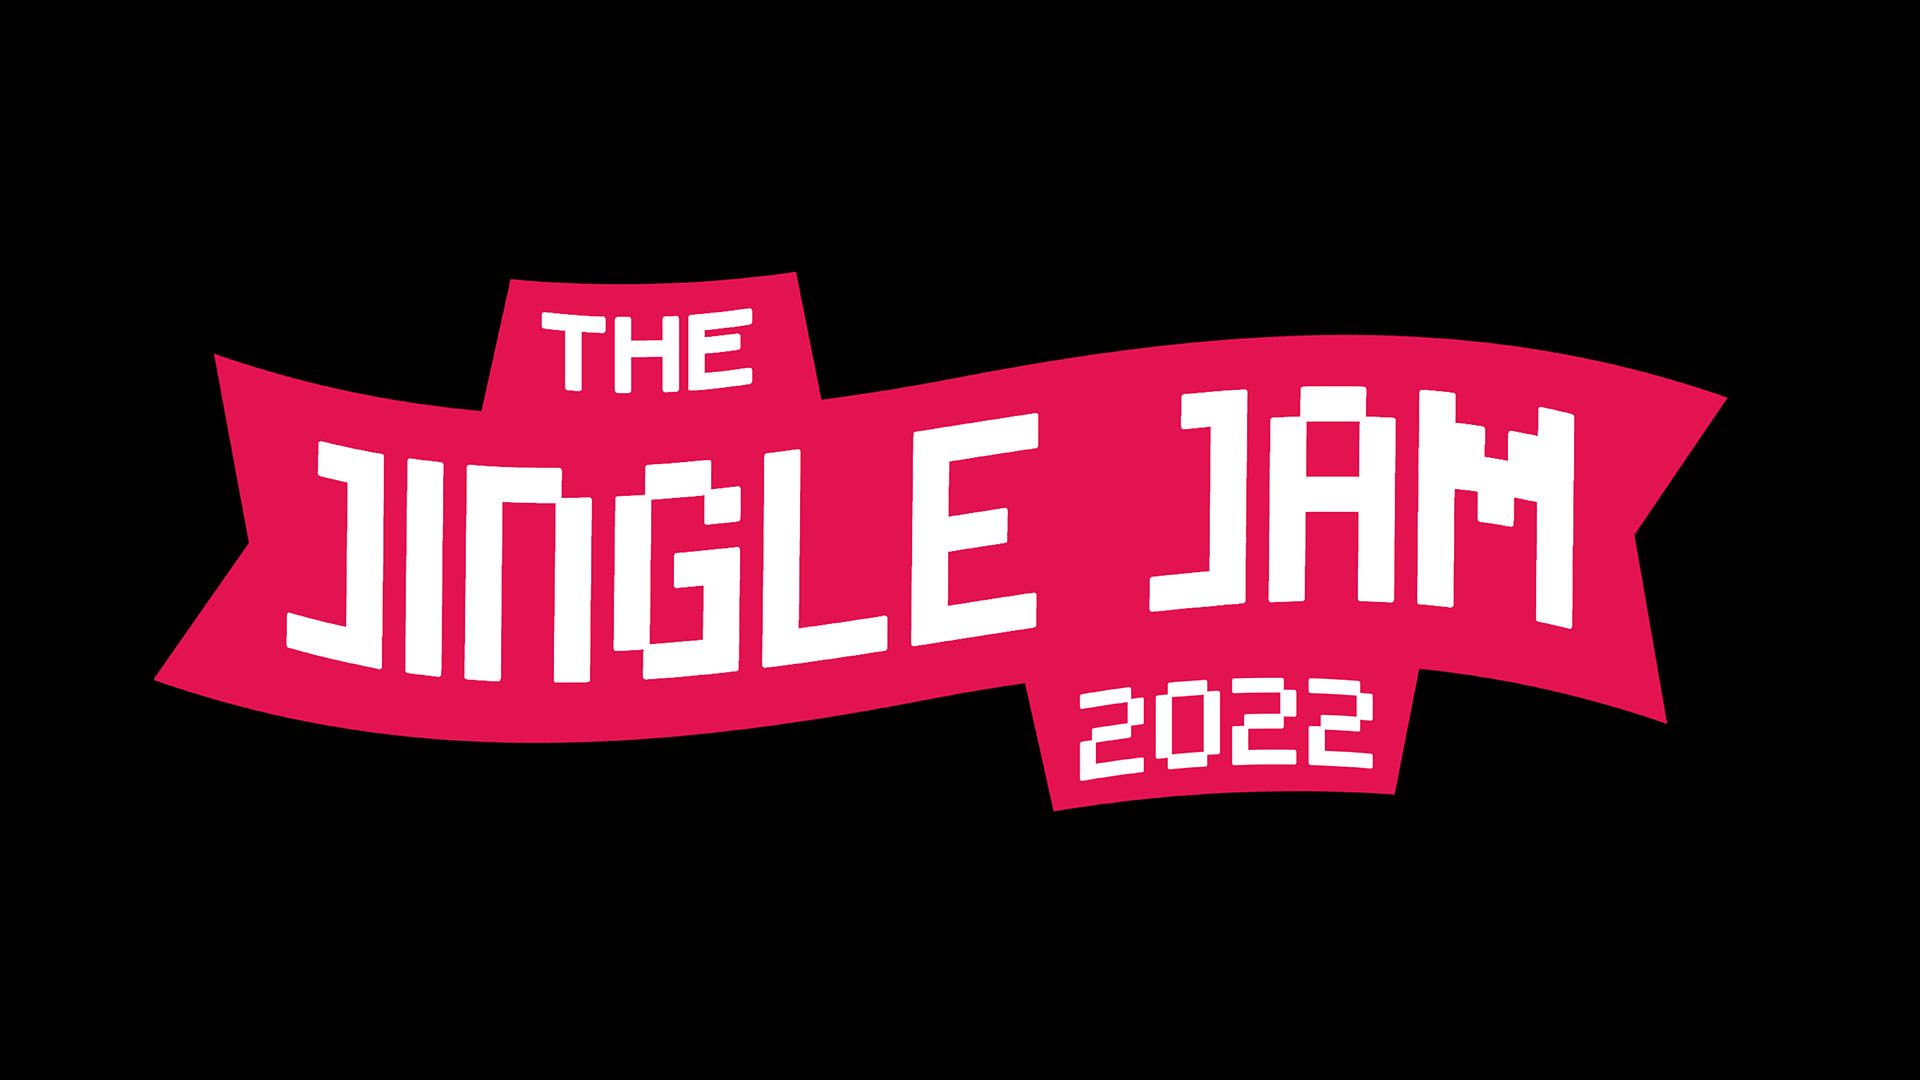 The words "Jingle Jam 2022" in an 8-bit computer graphic font, superimposed over a black background.